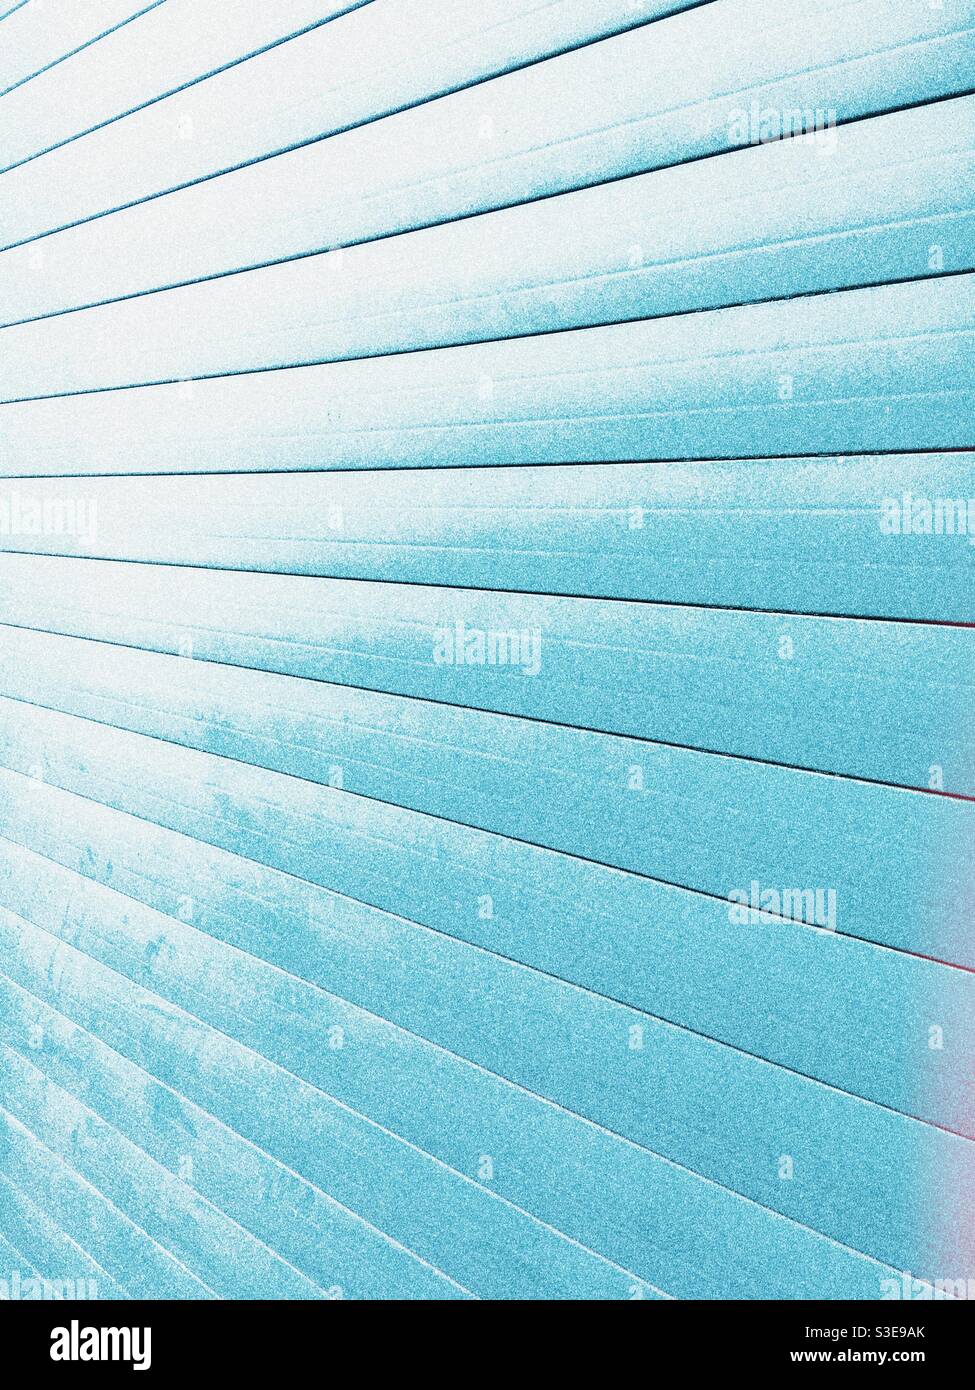 Perspective of light blue panels on a garage door. Abstract background image Stock Photo